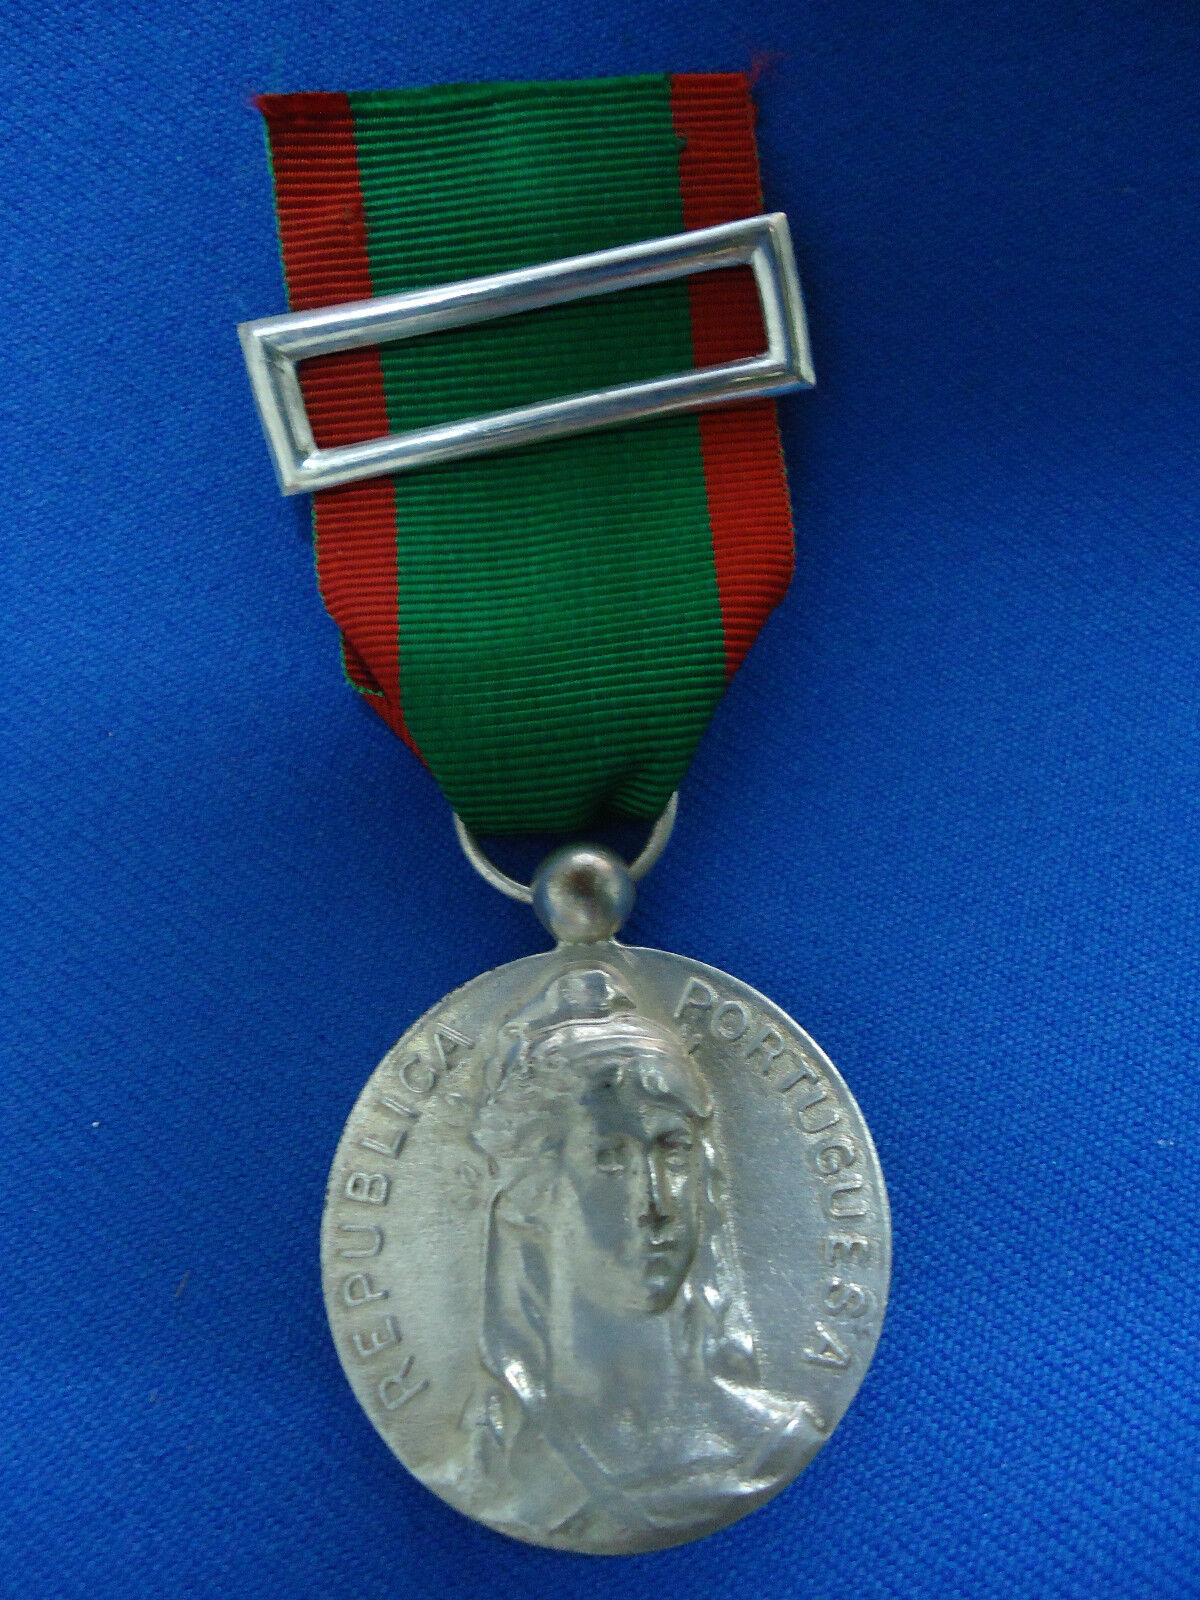 PORTUGAL PORTUGUESE MILITARY MEDAL 1910 WWI NEW RIBBON LOOK SCANS